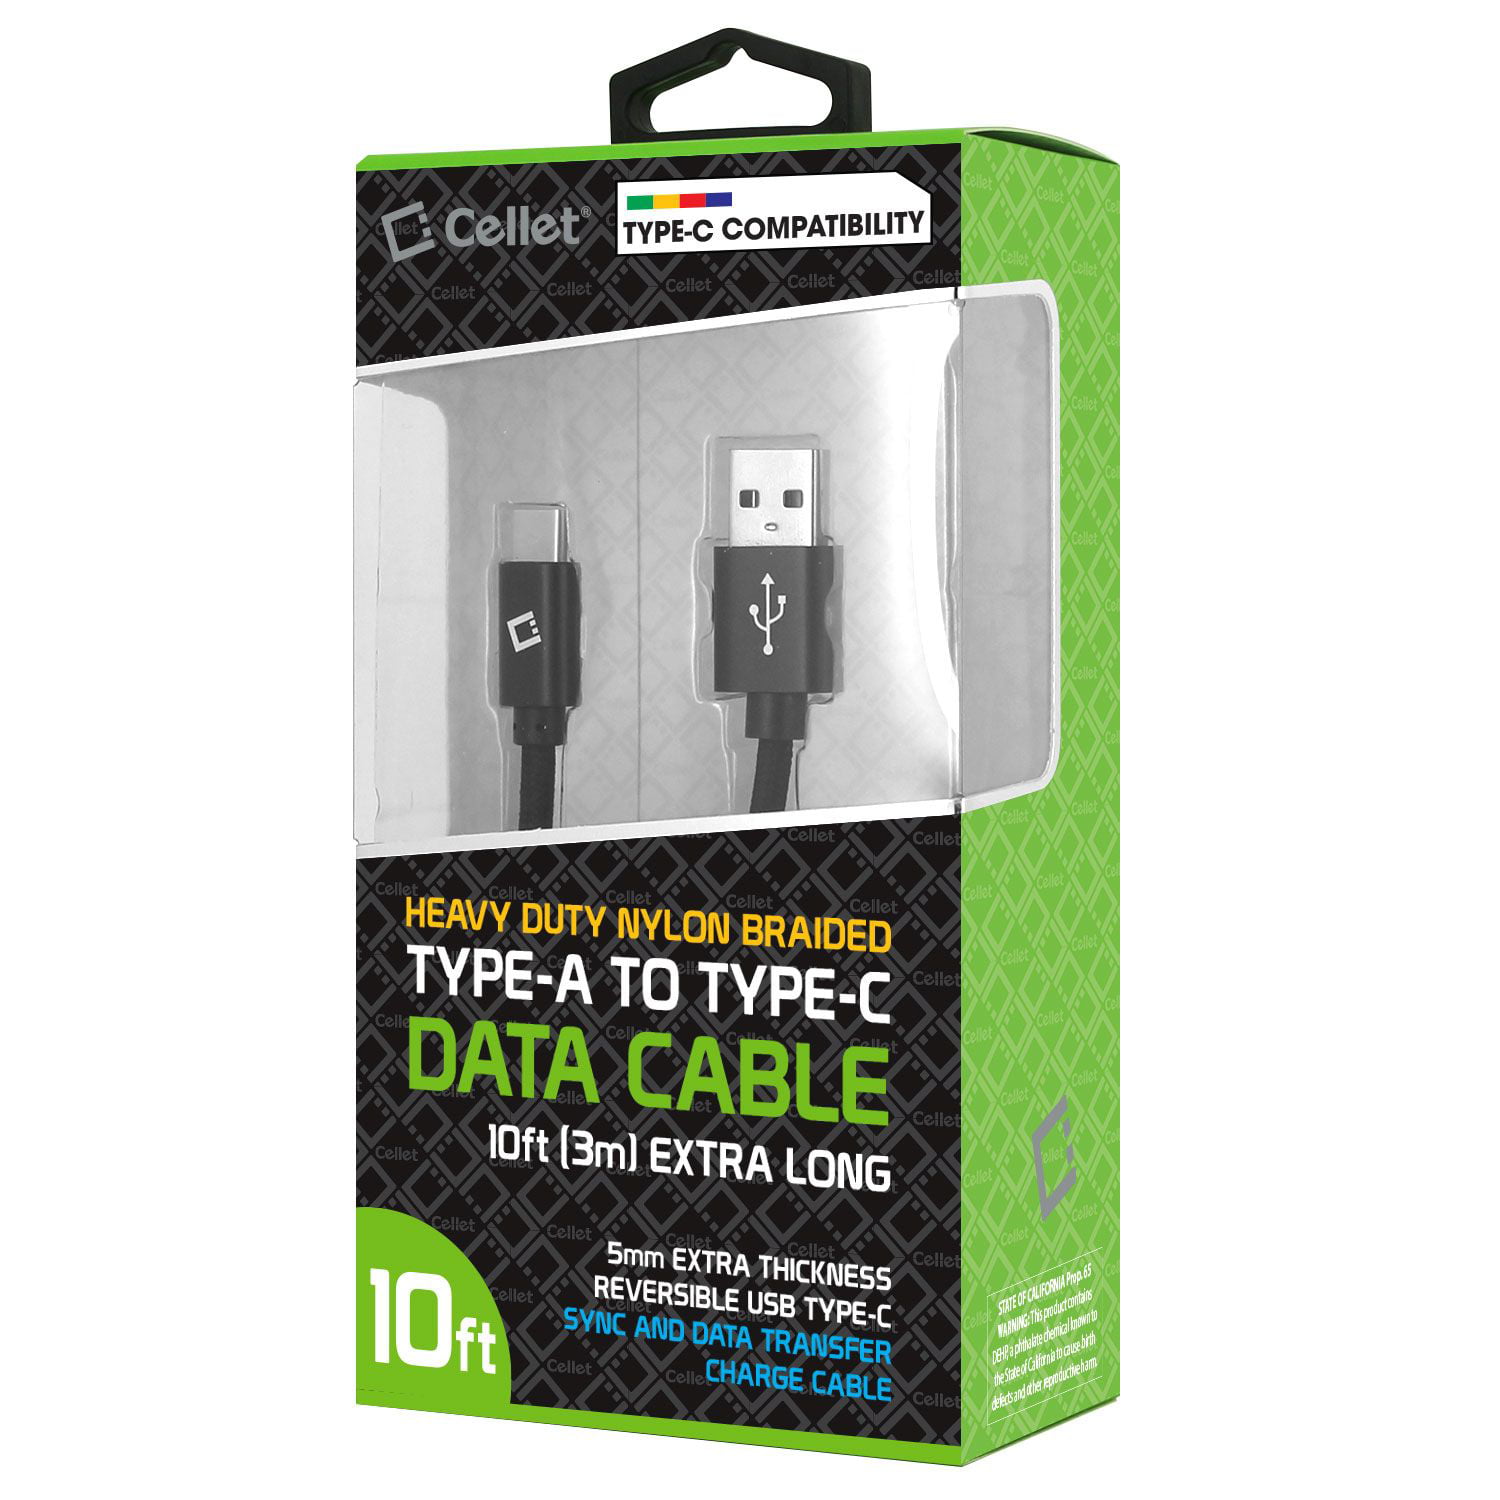 1.5M/5Ft Long Volt Plus Tech Professional USB to Type-C Braided Cable Works with Samsung SM-G977U for Full 65Watt Charging and Transfer Speeds